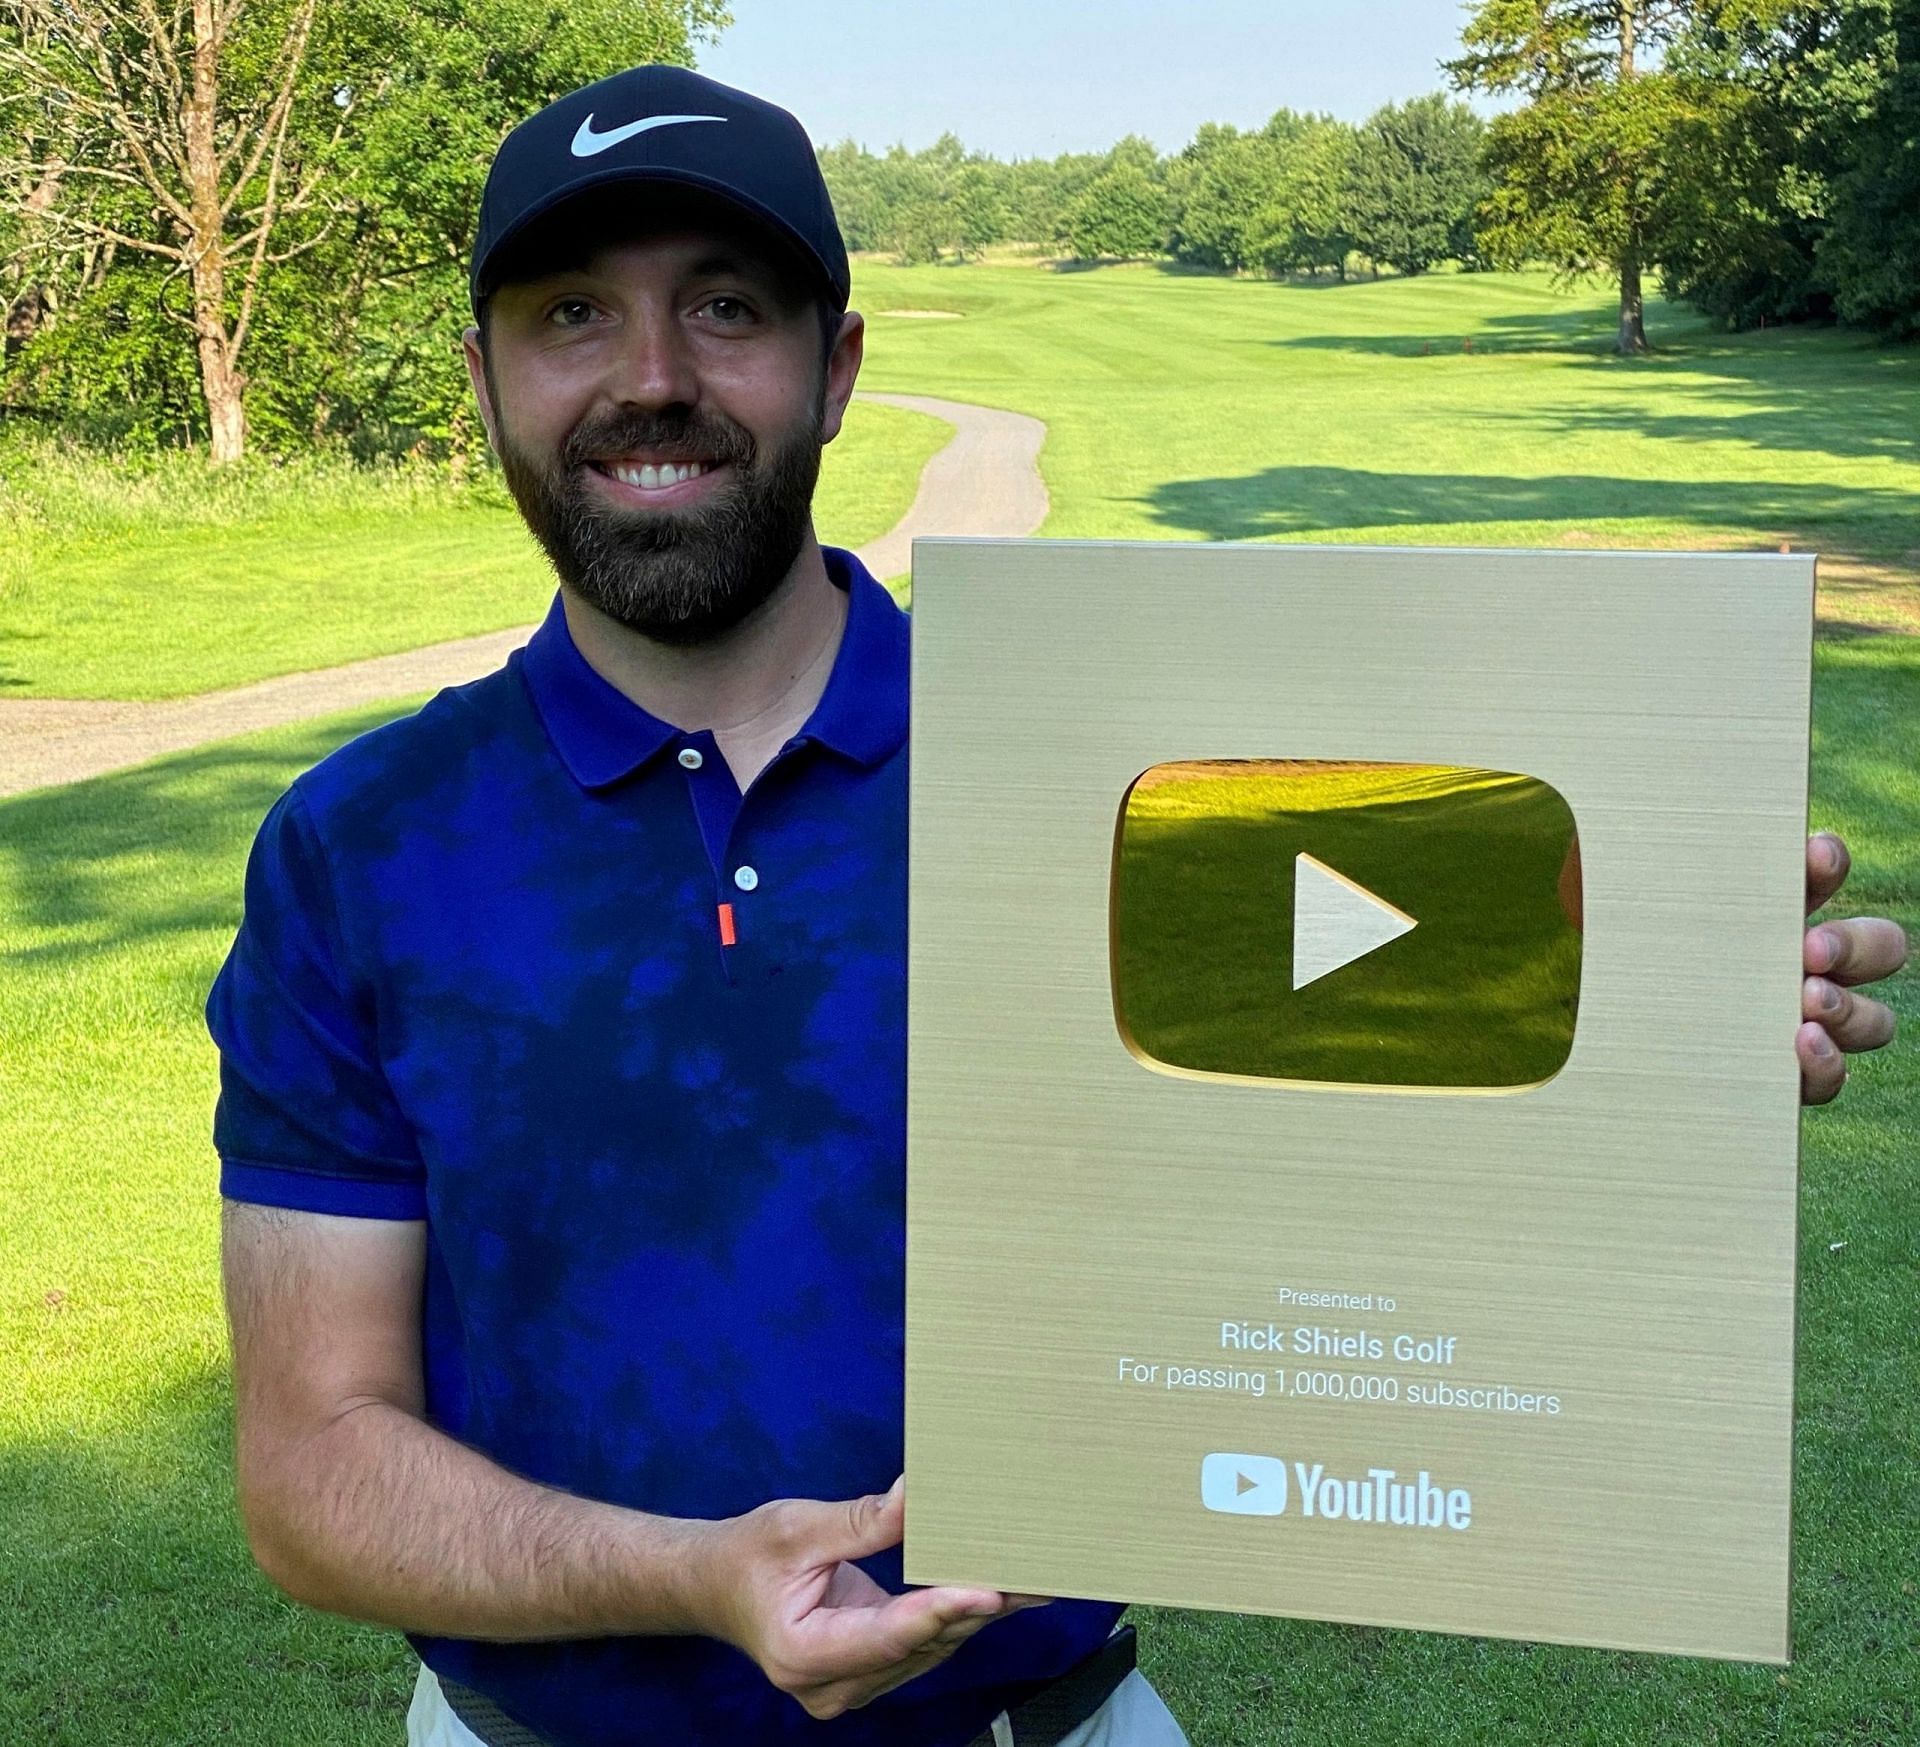 Rick Shiels with his Golden play button after hitting 1 million subscribers